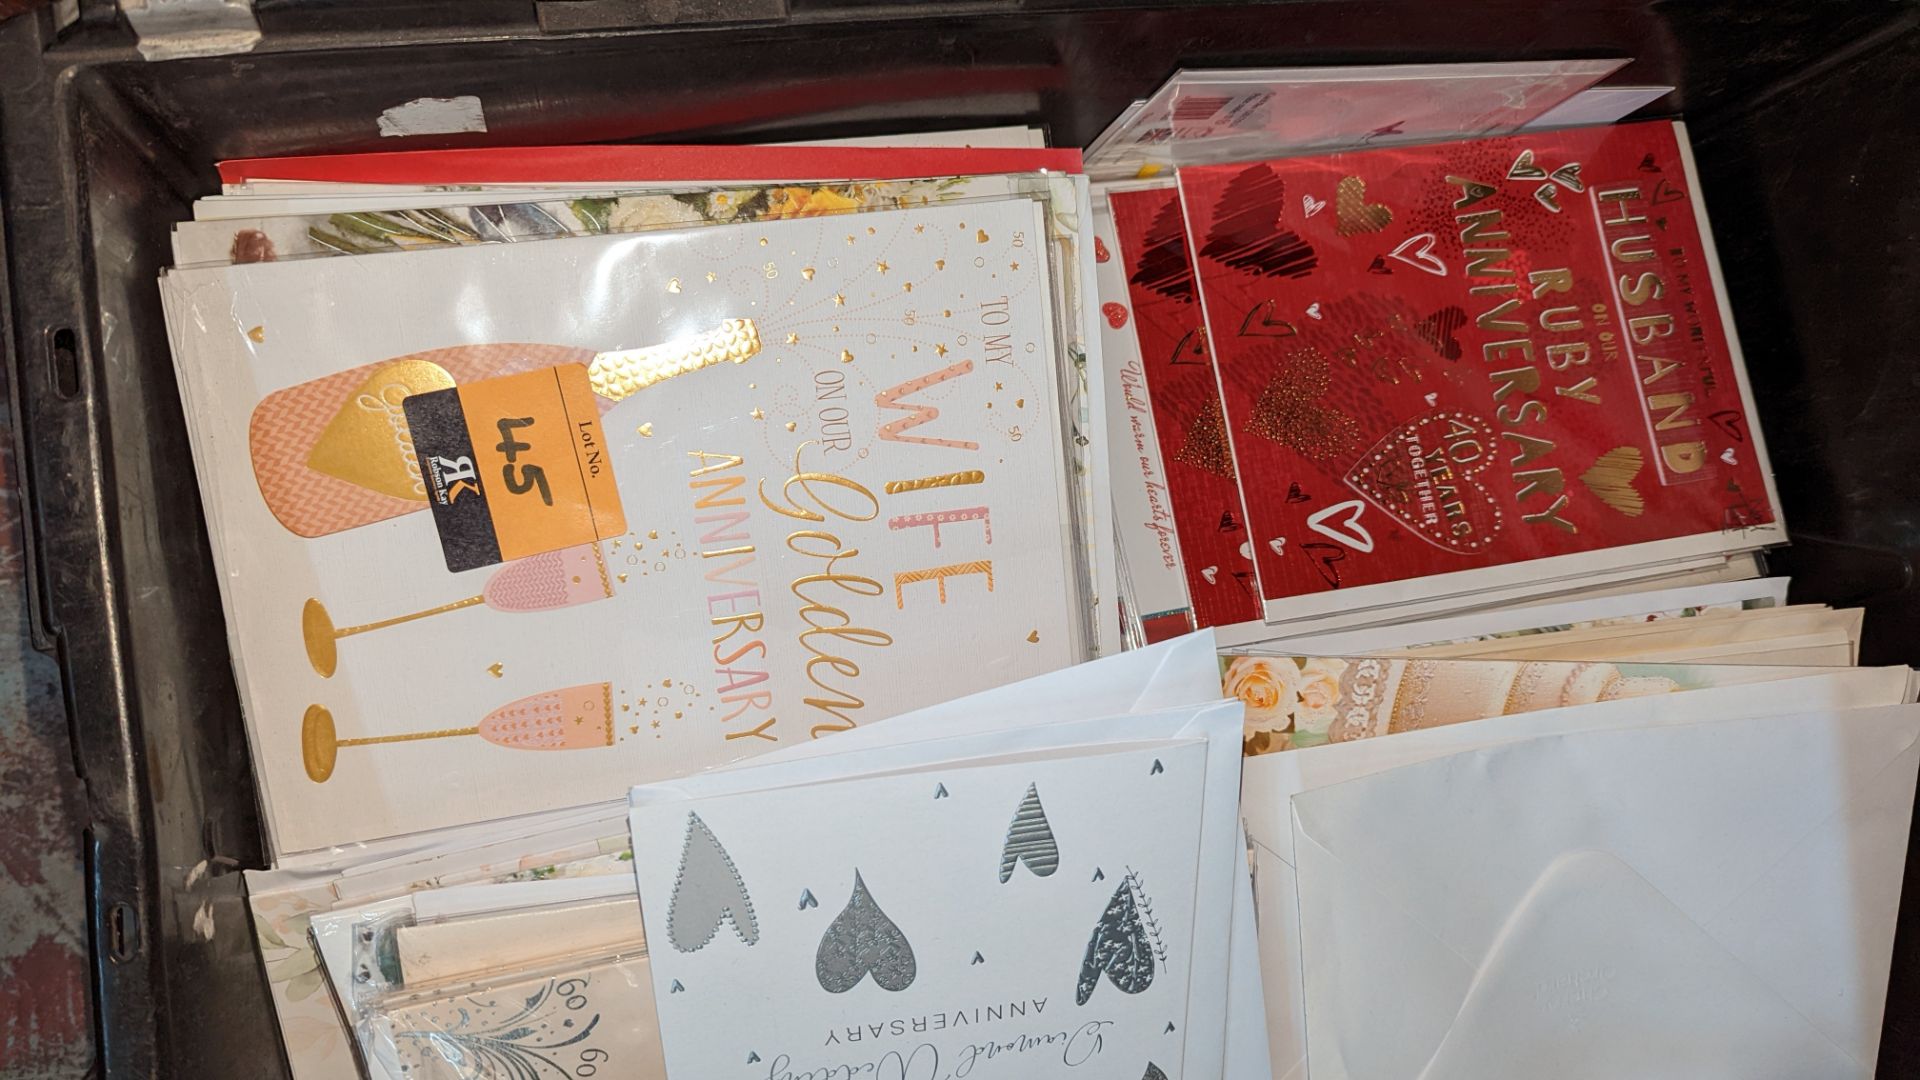 Contents of a crate of greetings cards - crate excluded - Image 7 of 7